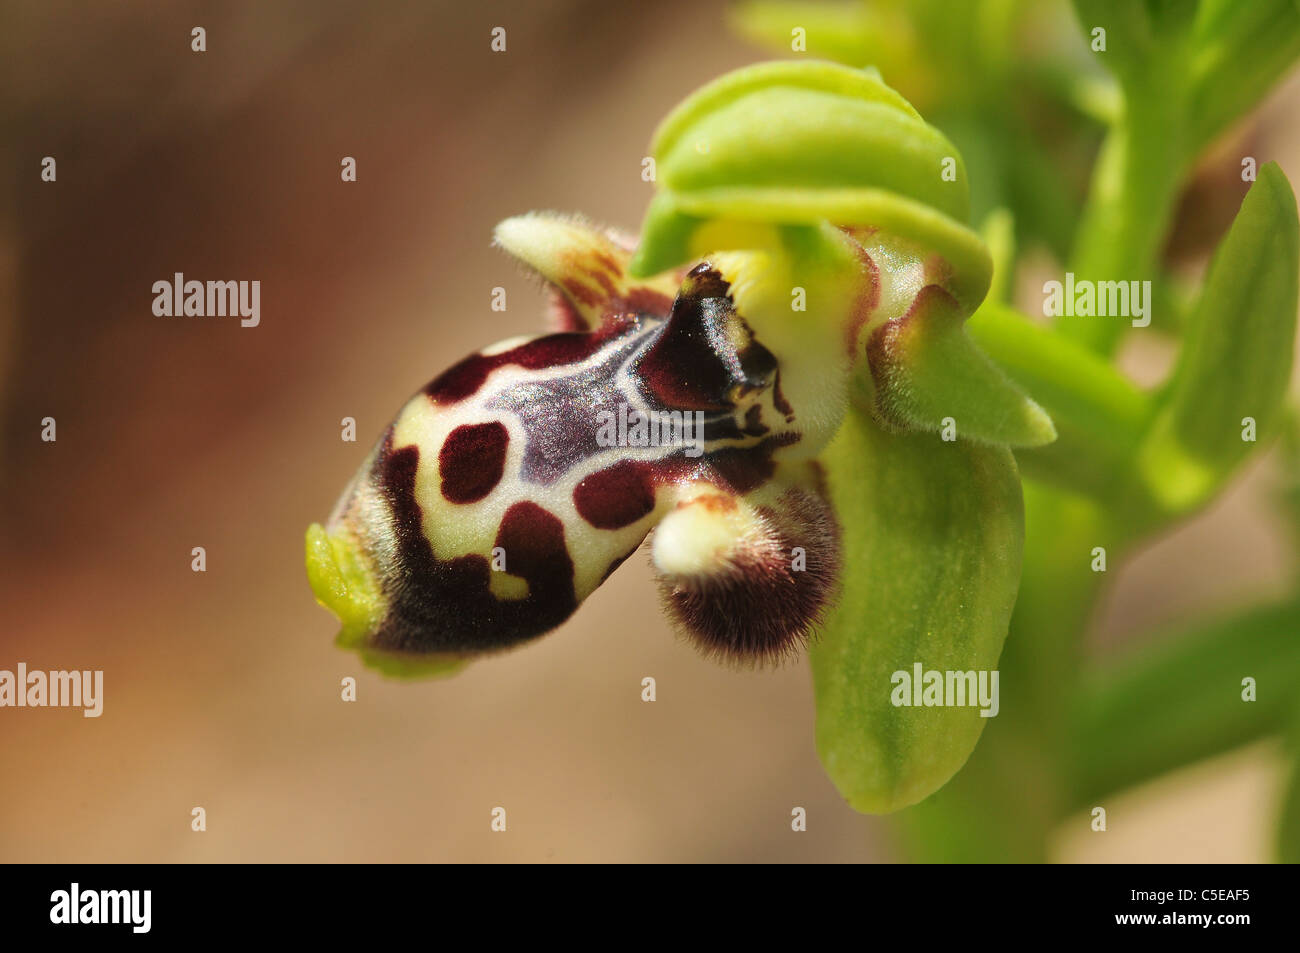 Israel, Ophrys wild bee orchid (Ophrys umbilicata) Bee-Orchid Stock Photo